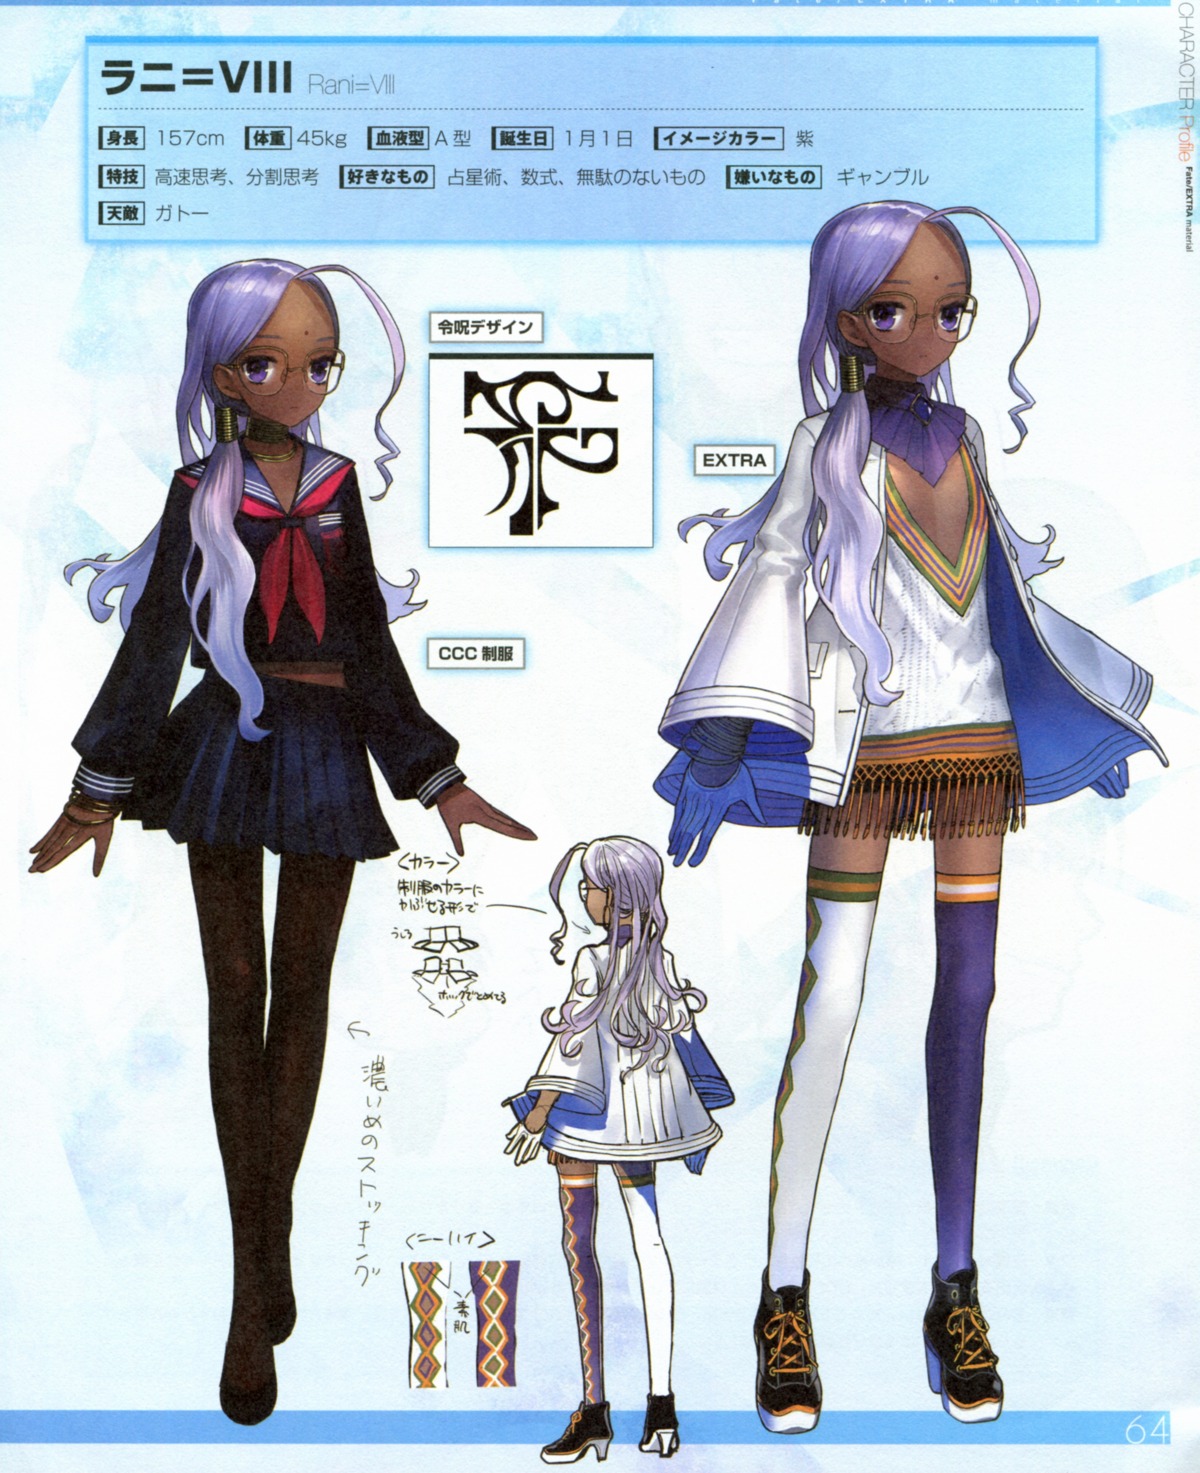 fate/extra fate/extra_ccc fate/stay_night megane paper_texture rani_viii seifuku thighhighs type-moon wada_rco